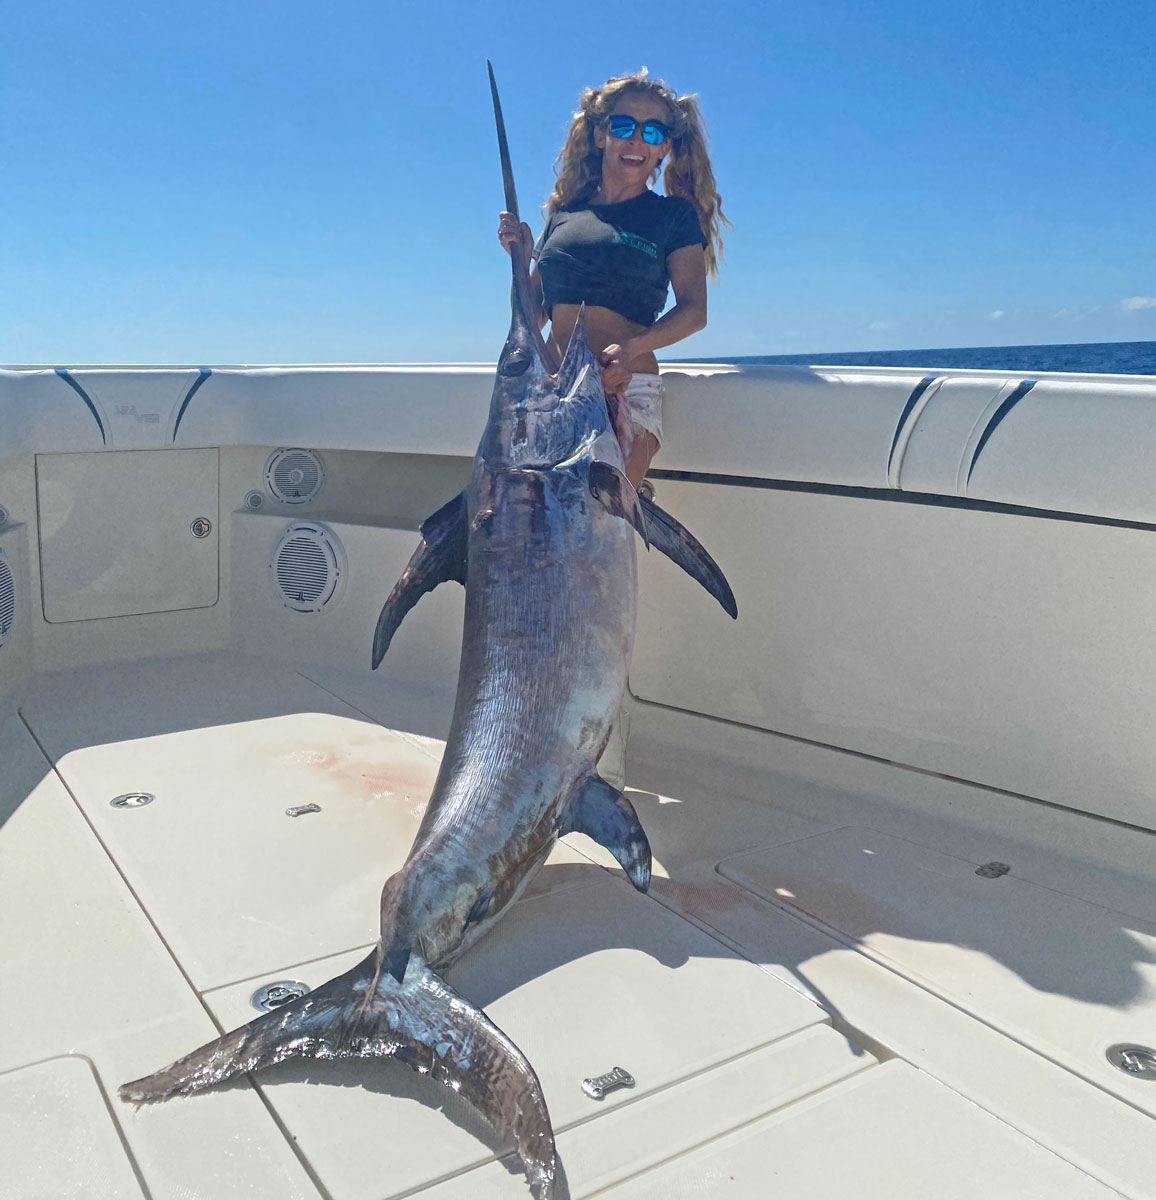 London Rosiere poses with her “smaller” swordfish, a 130-pounder that just warmed her up for her two-hour plus battle with a much bigger one minutes later.